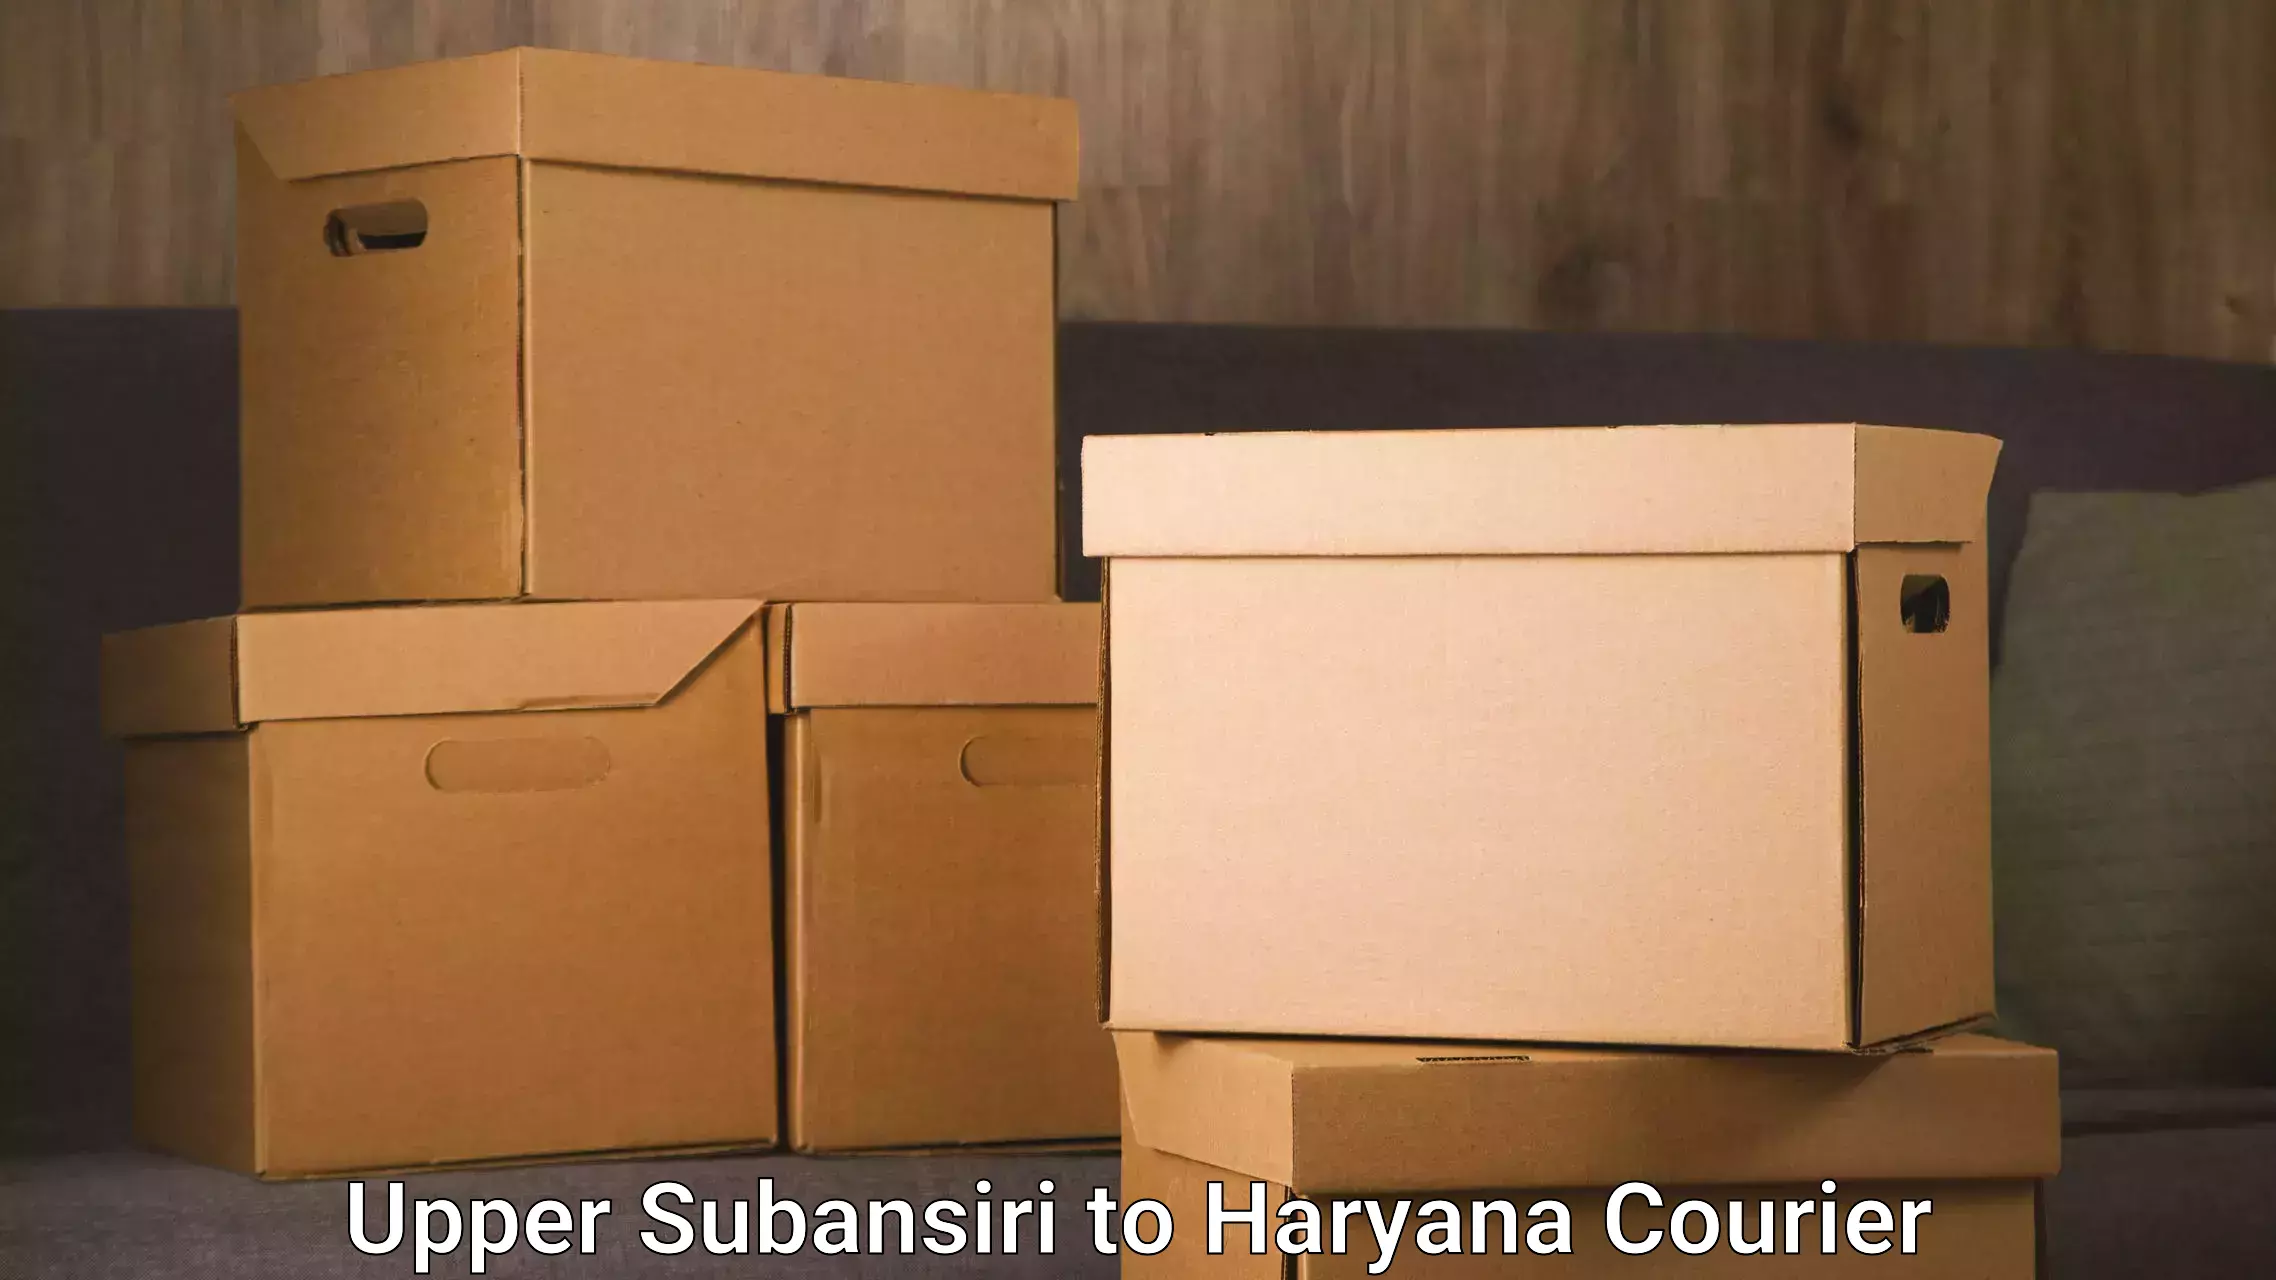 Fast delivery service Upper Subansiri to Pinjore